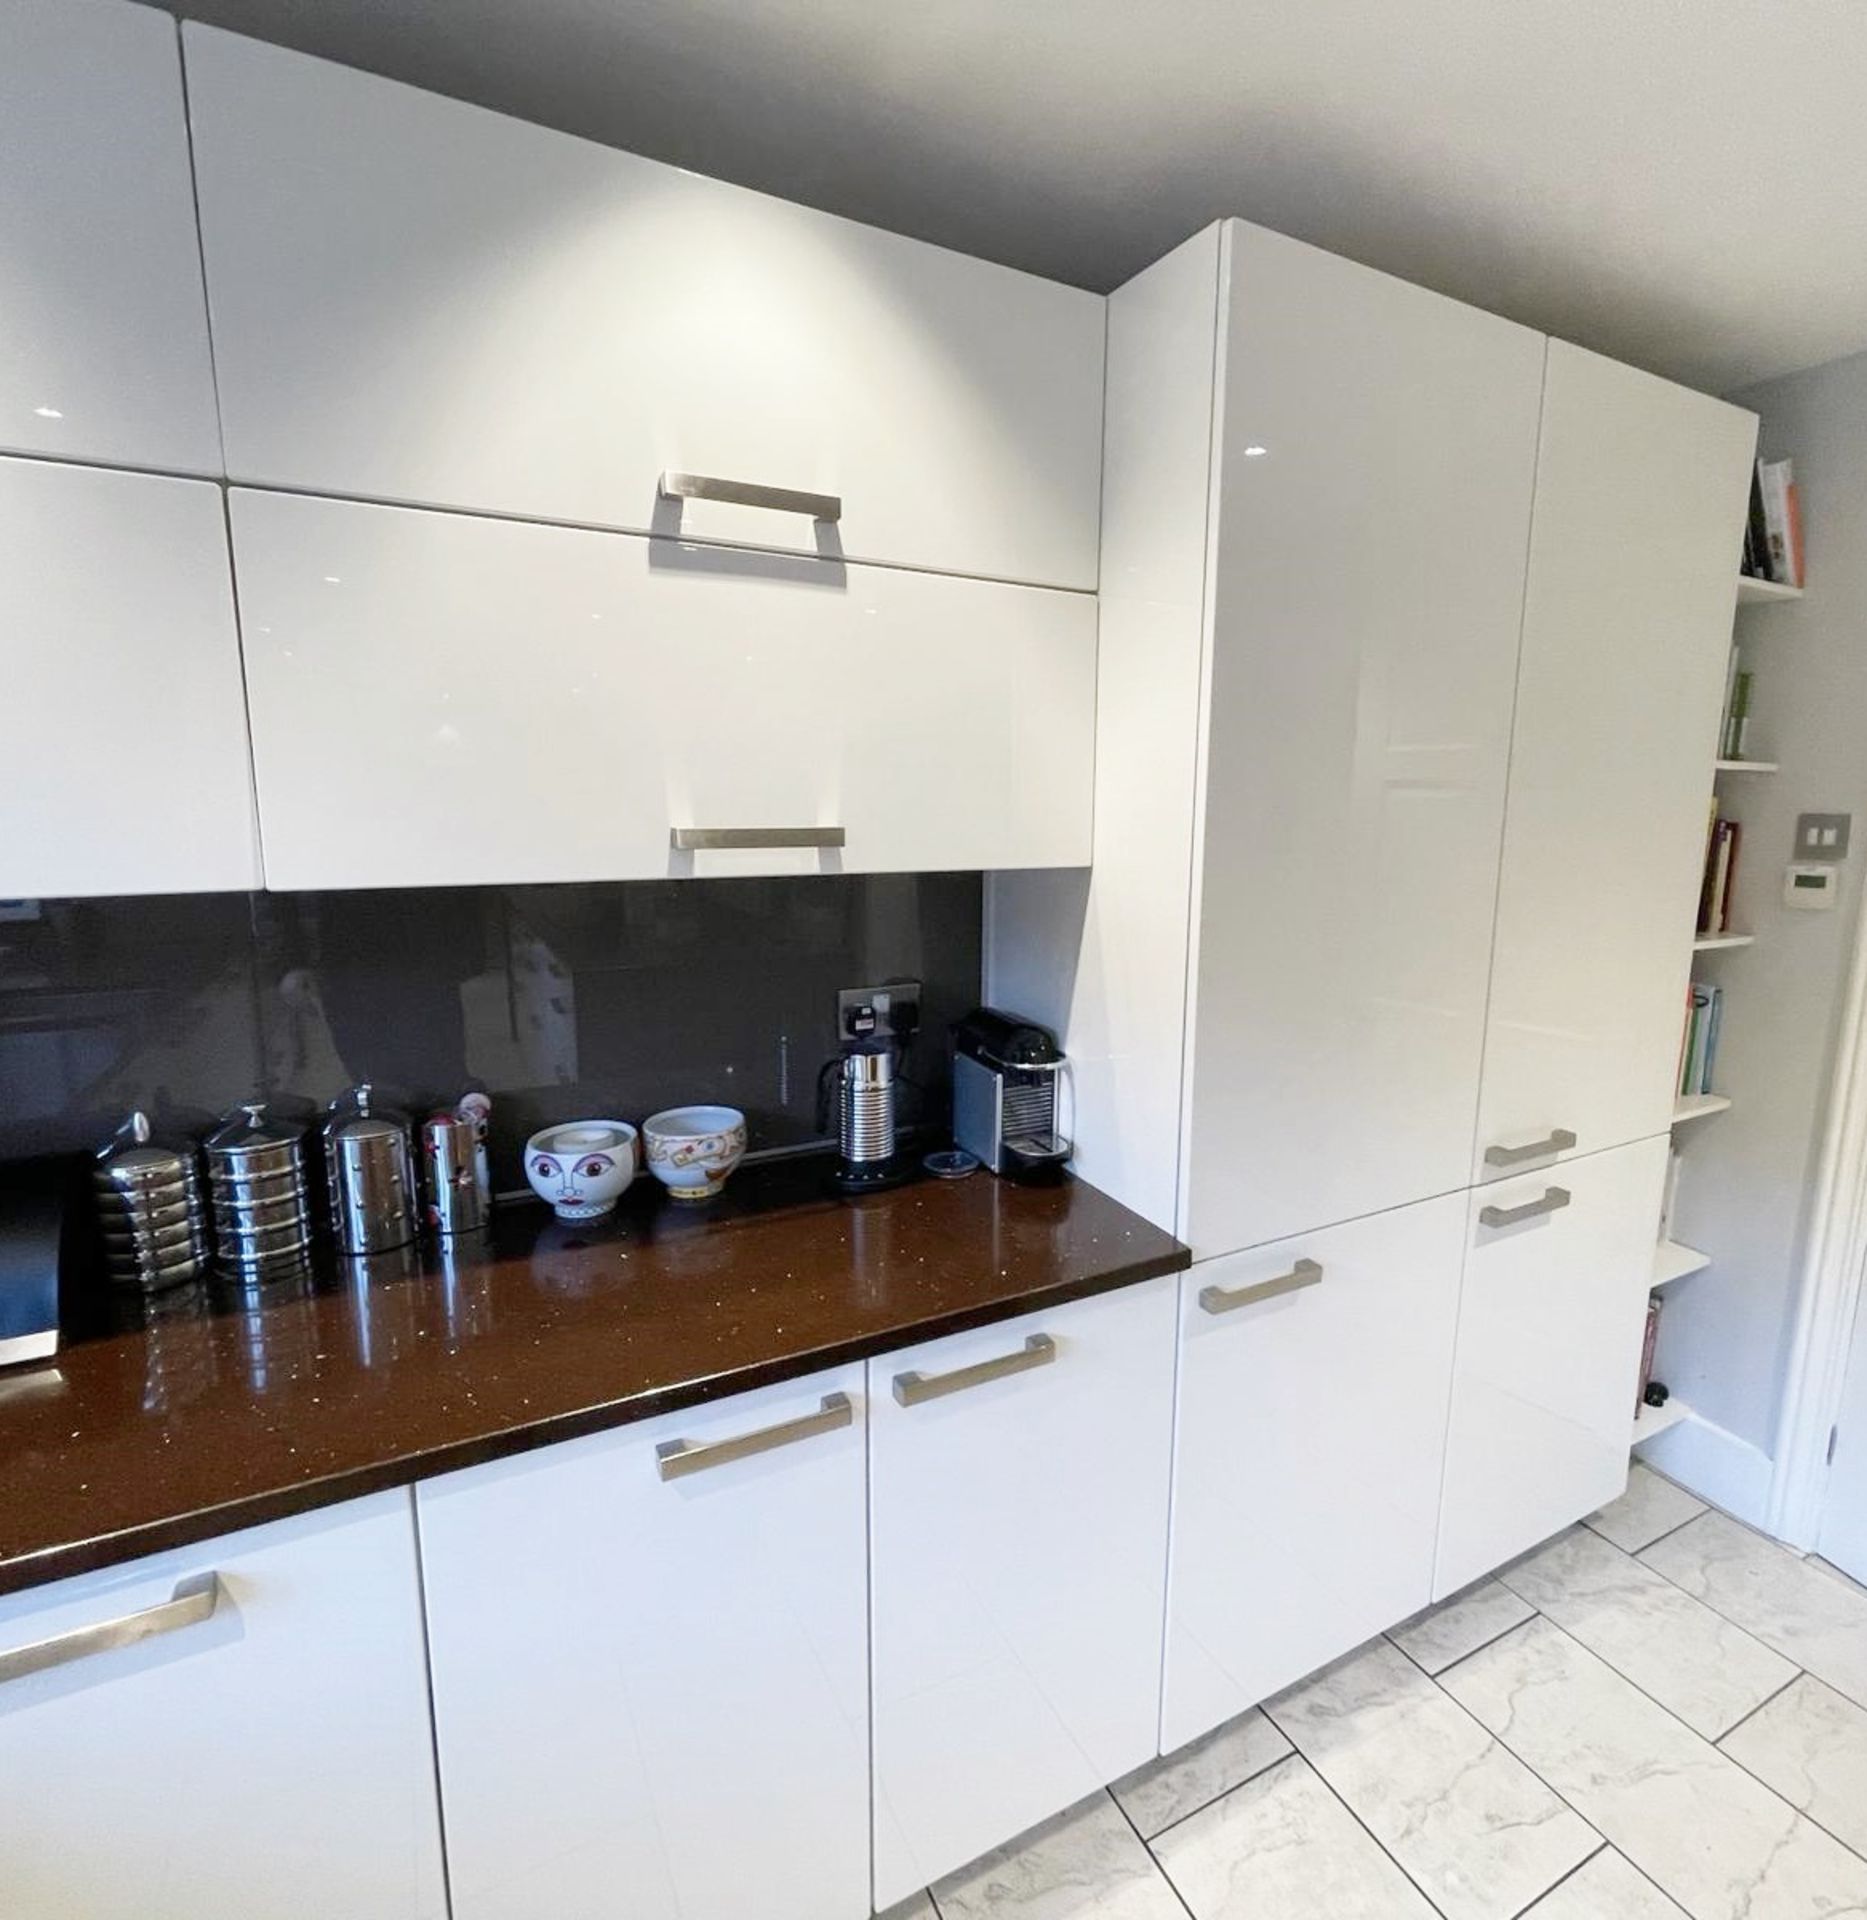 1 x ALNO Bespoke Fitted White Kitchen with Central Island, Neff & Miele Appliances, Quartz Surfaces - Image 40 of 85